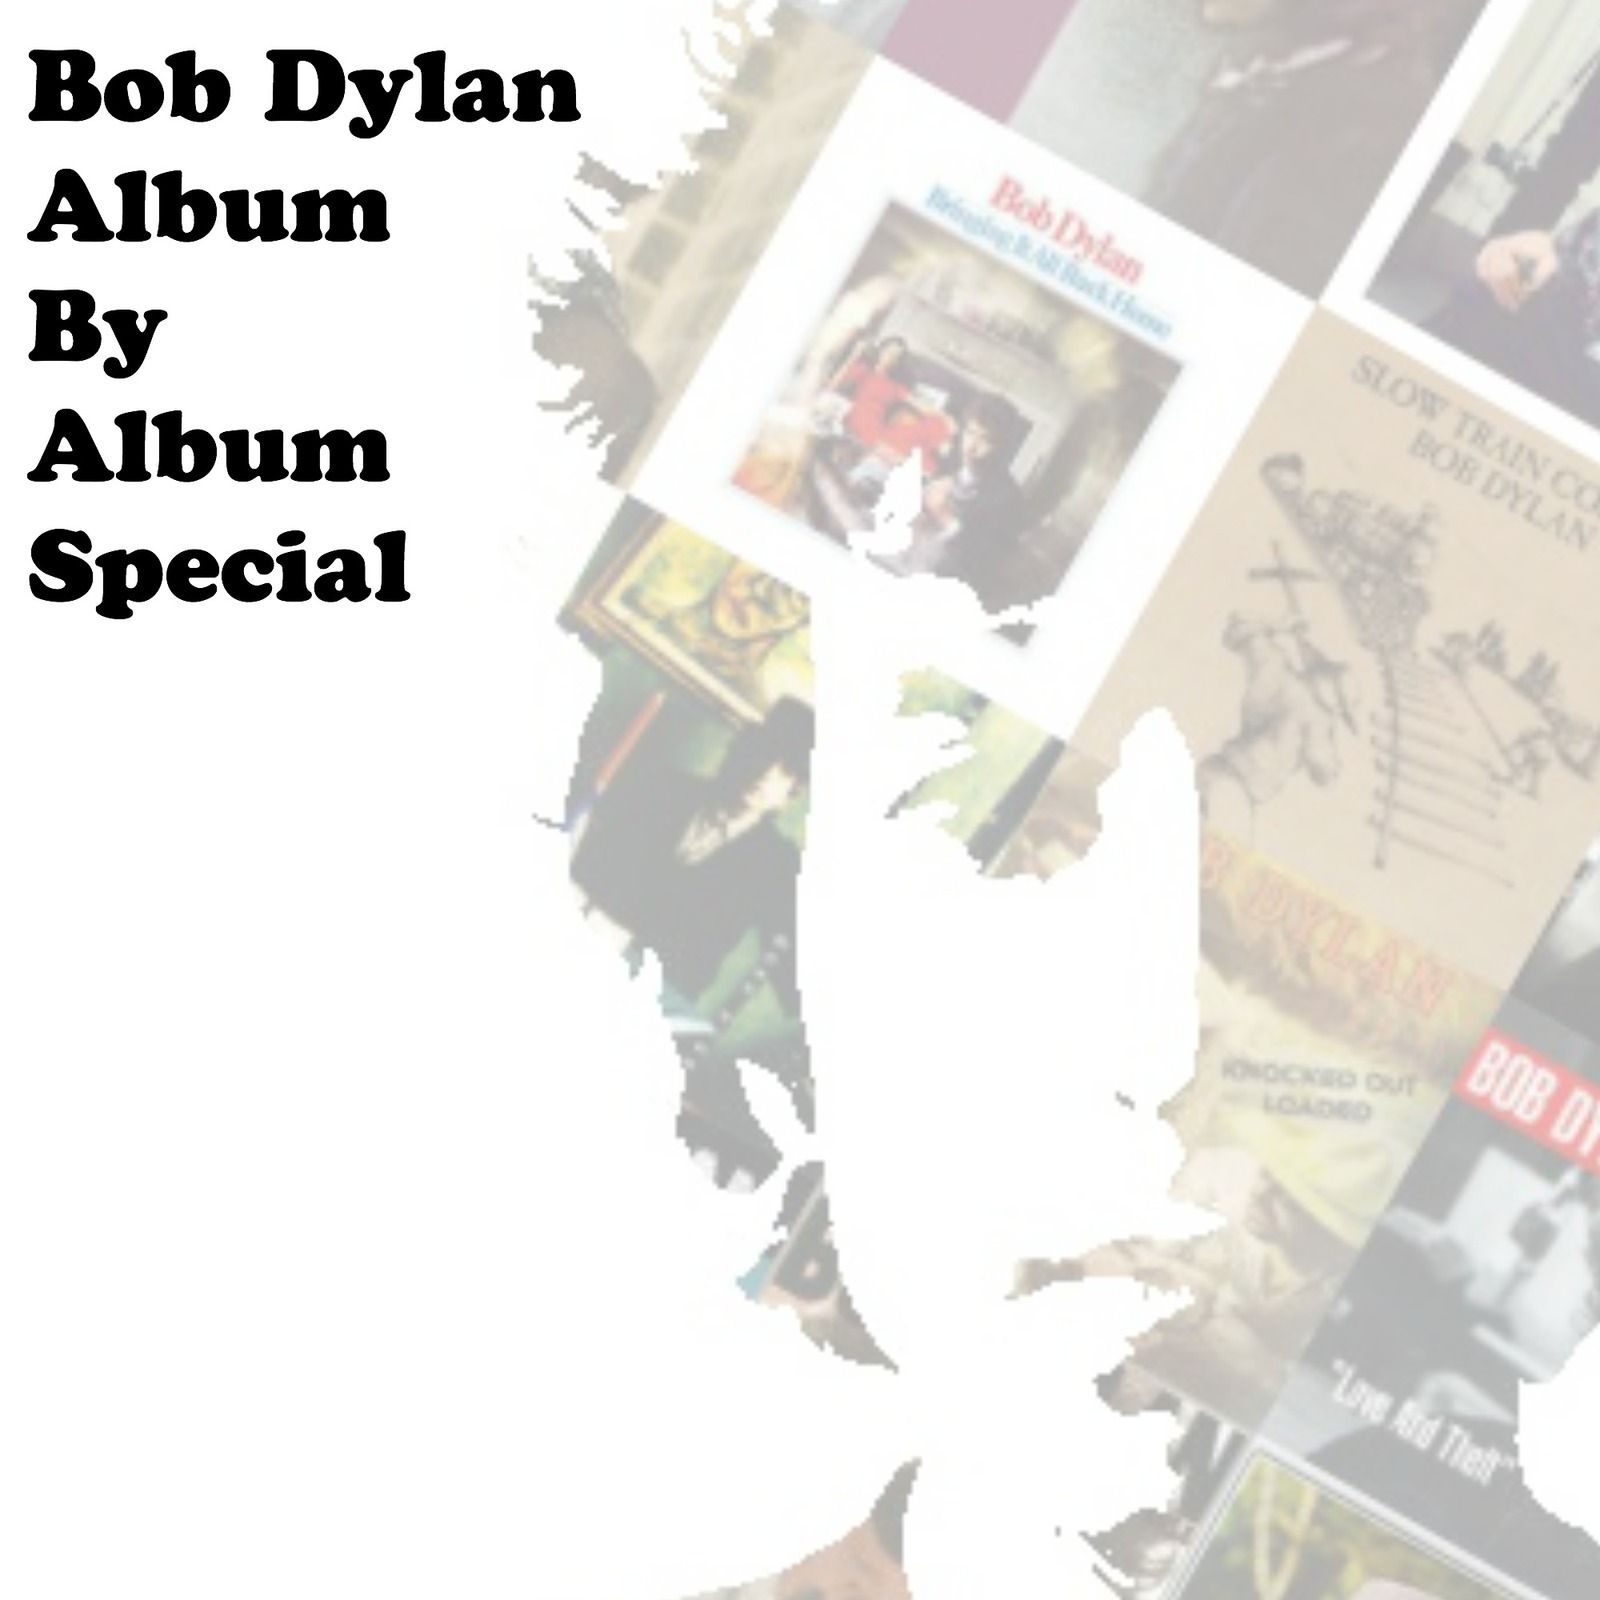 Special: Is Bob Dylan’s musical diversity overlooked compared to his lyrics?